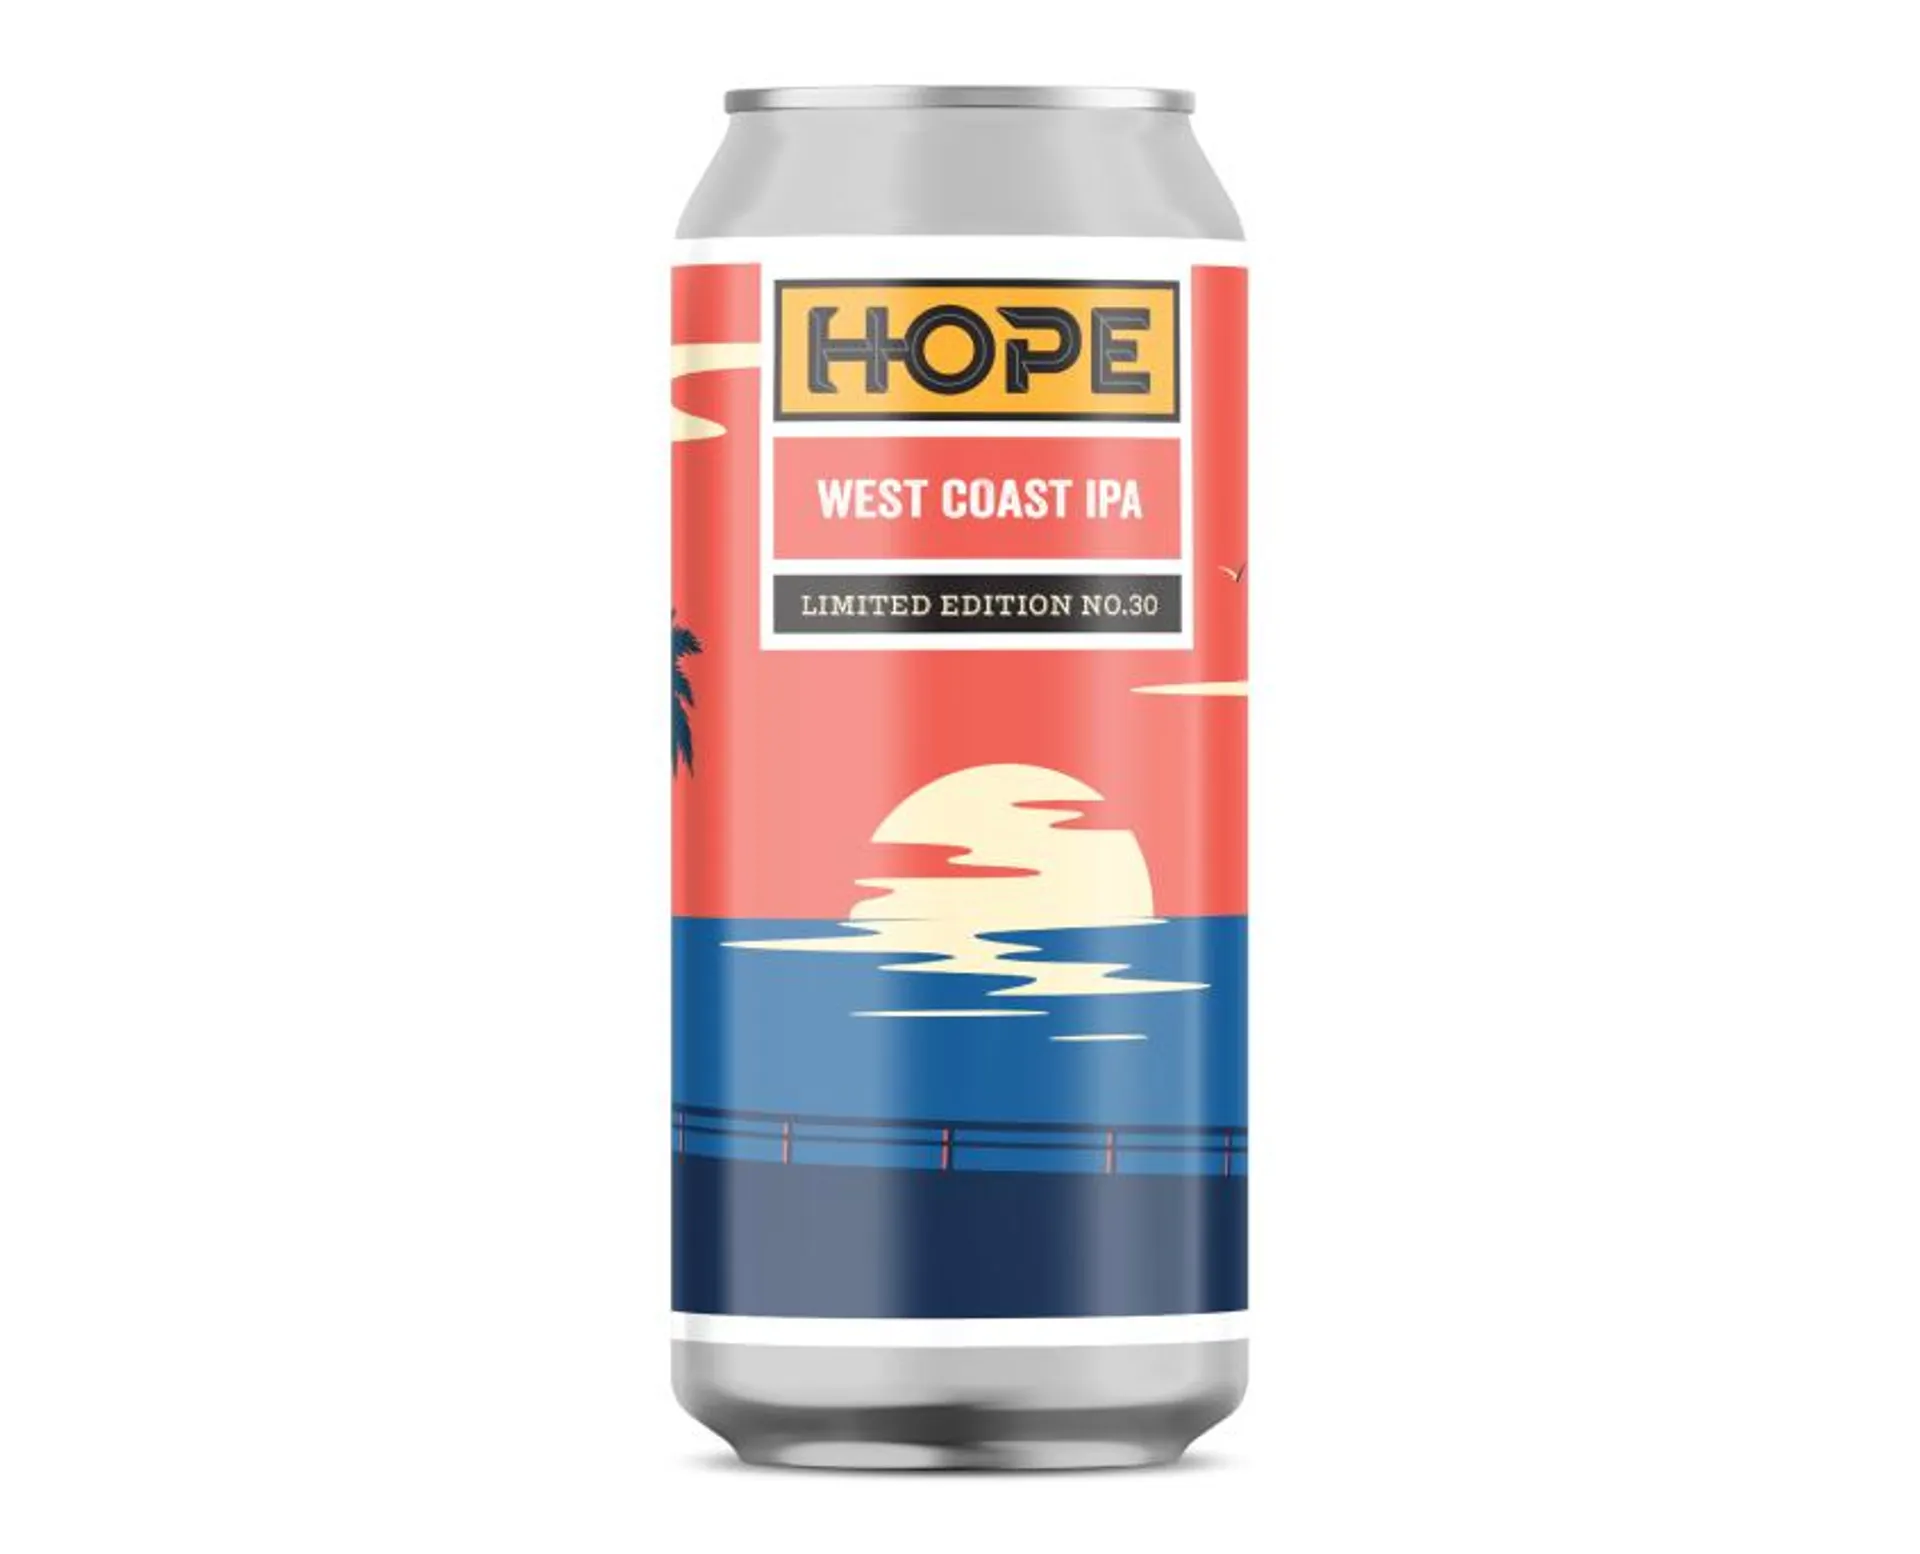 Hope- West Coast IPA Limited Edition no.30 7.4% ABV 440ml Can